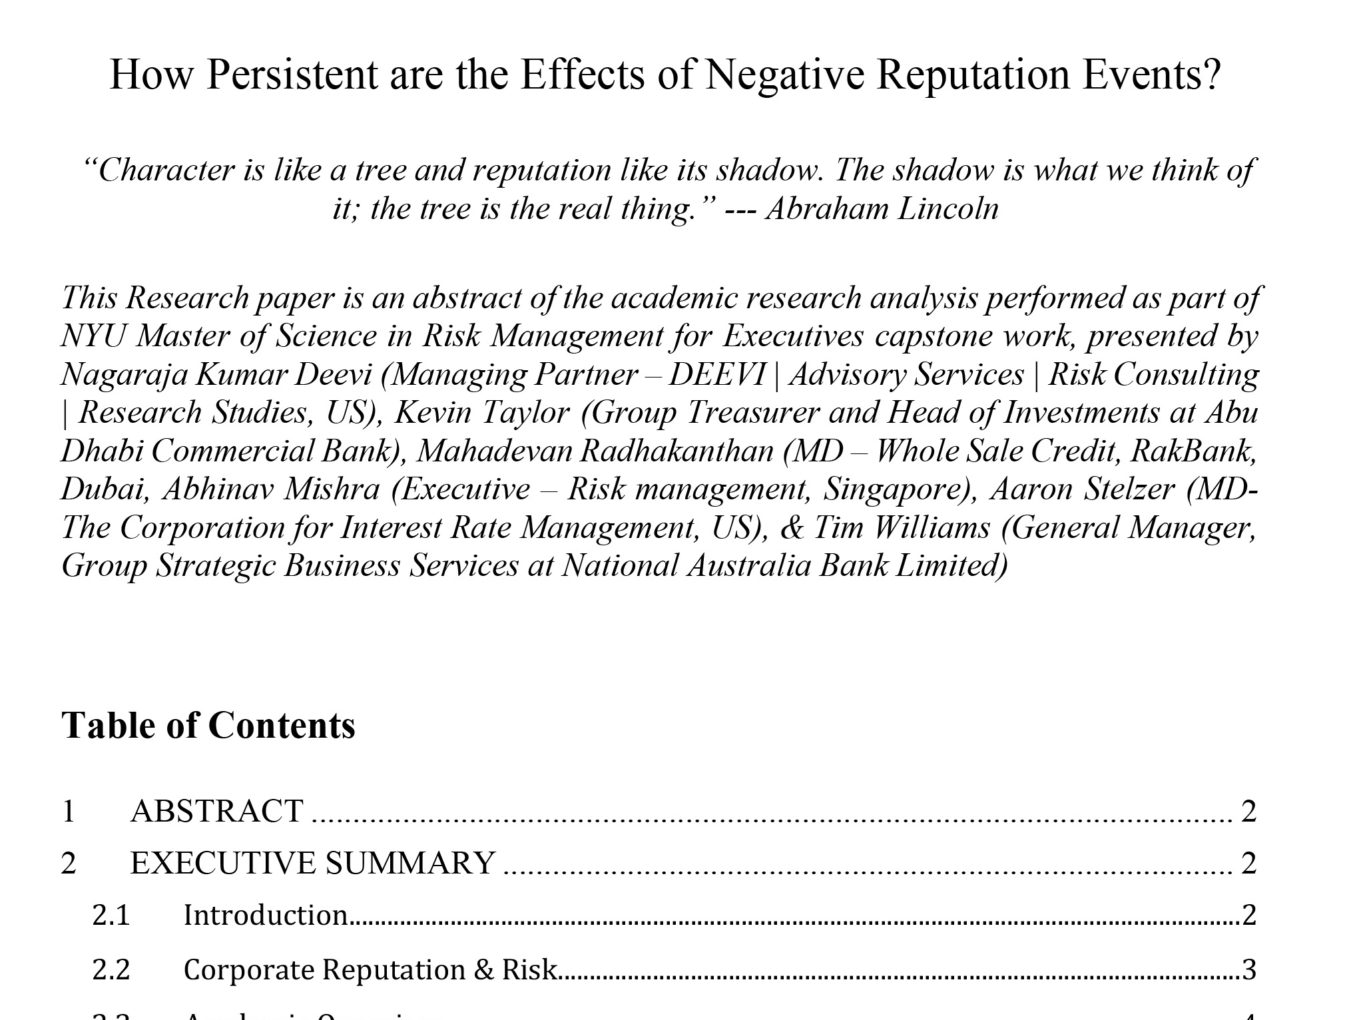 How Persistent are the Effects of Negative Reputation Events?